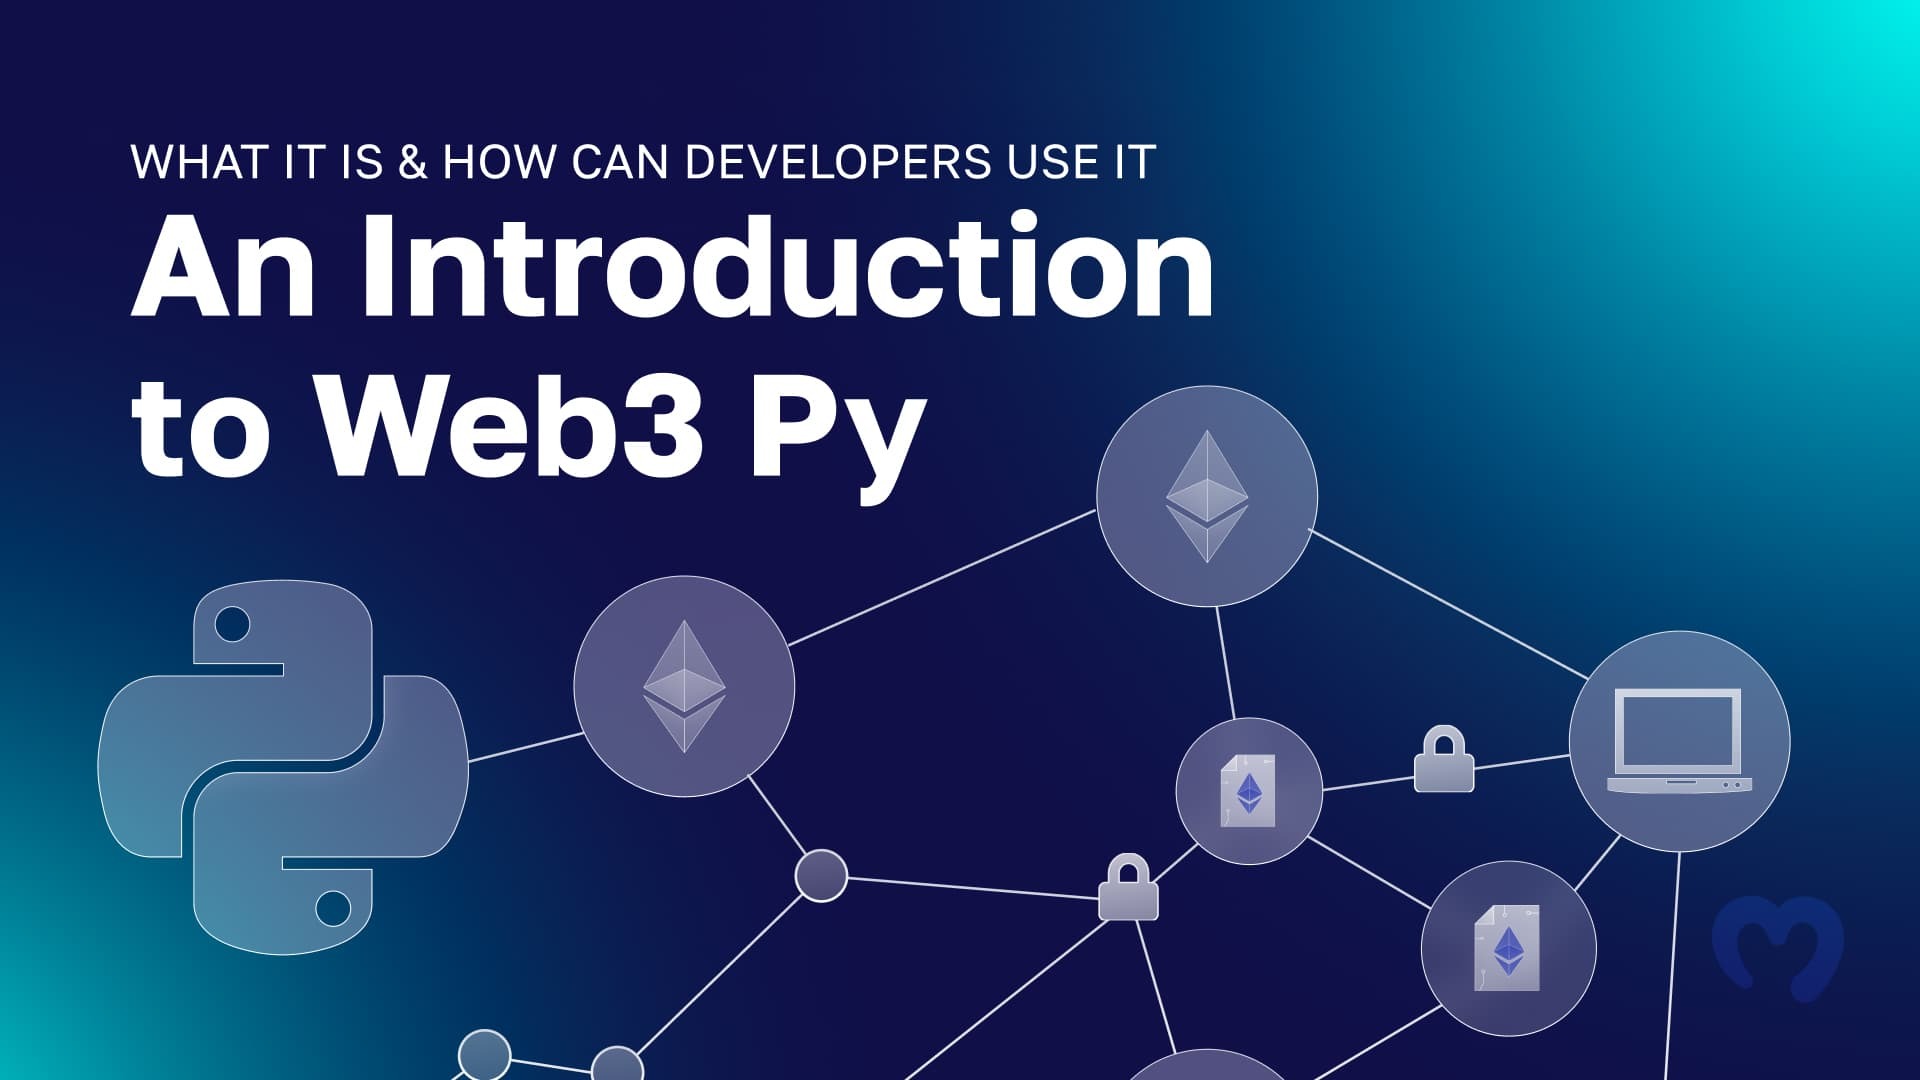 Exploring Web3 Py - What is it and how can developers use Web3 Py